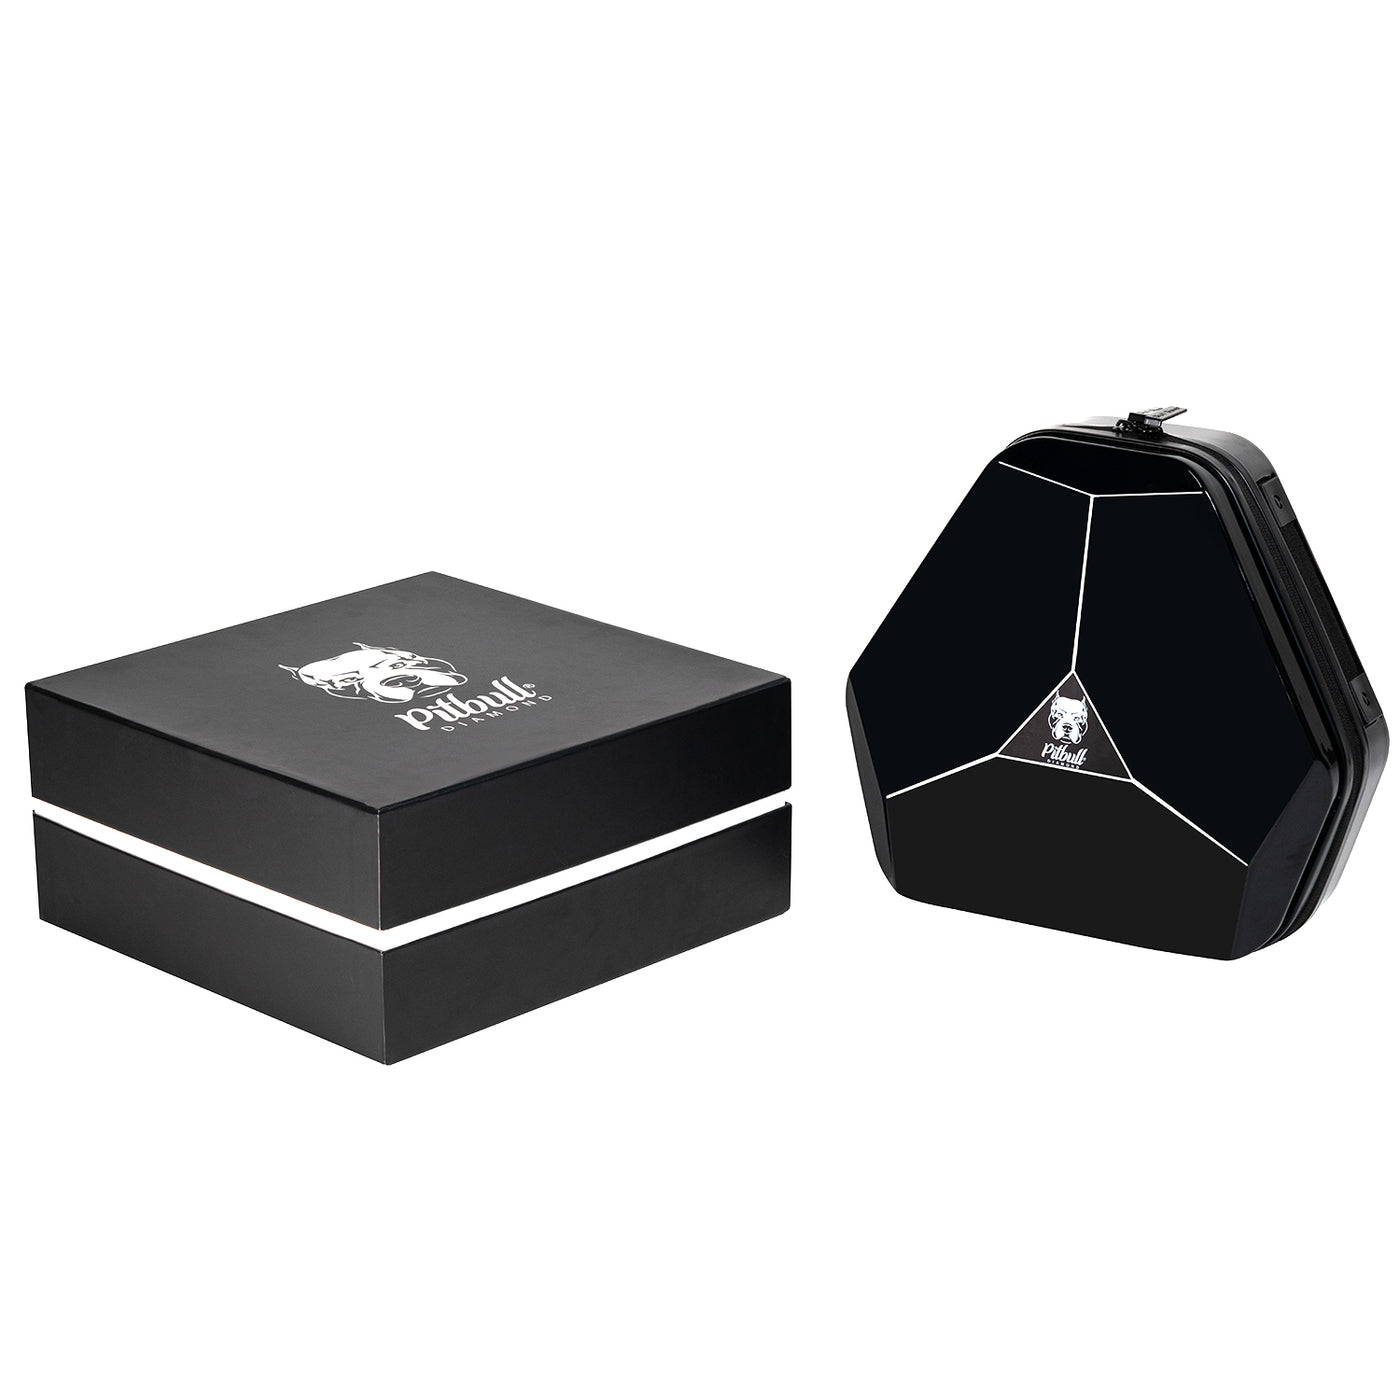 Pitbull diamond travel case with glossy finish and its packaging box